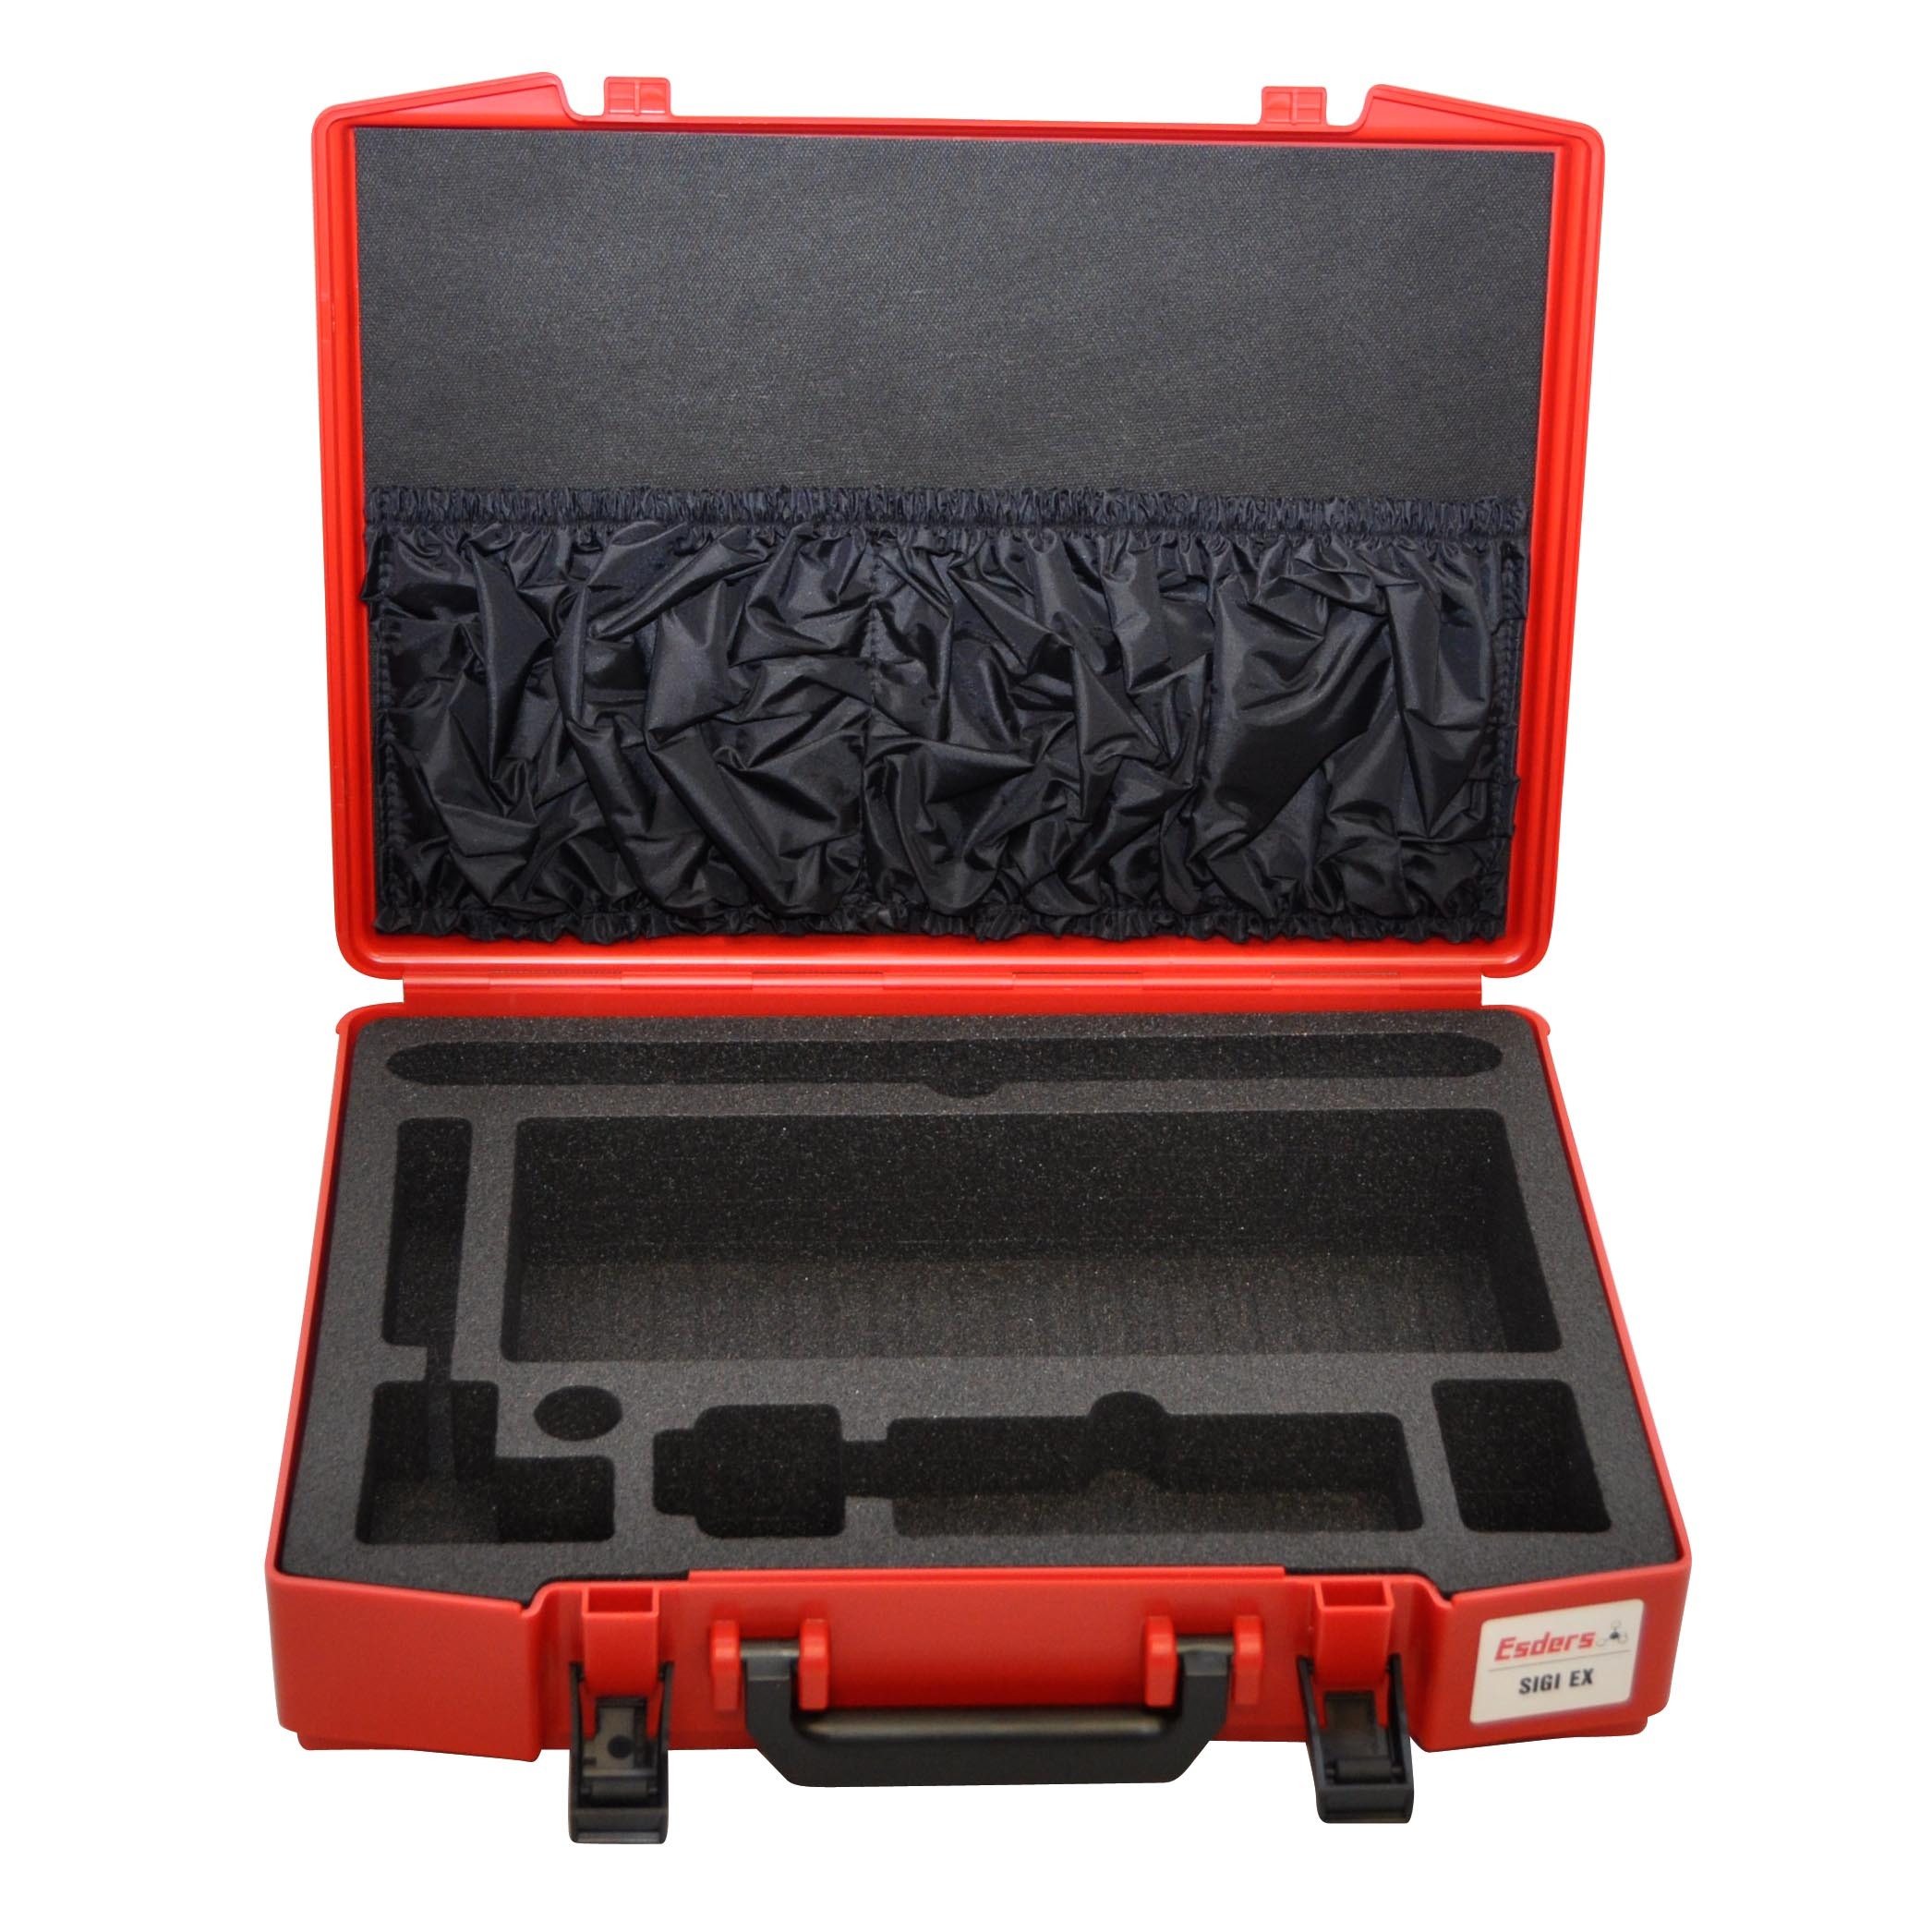 Carrying case with foam insert